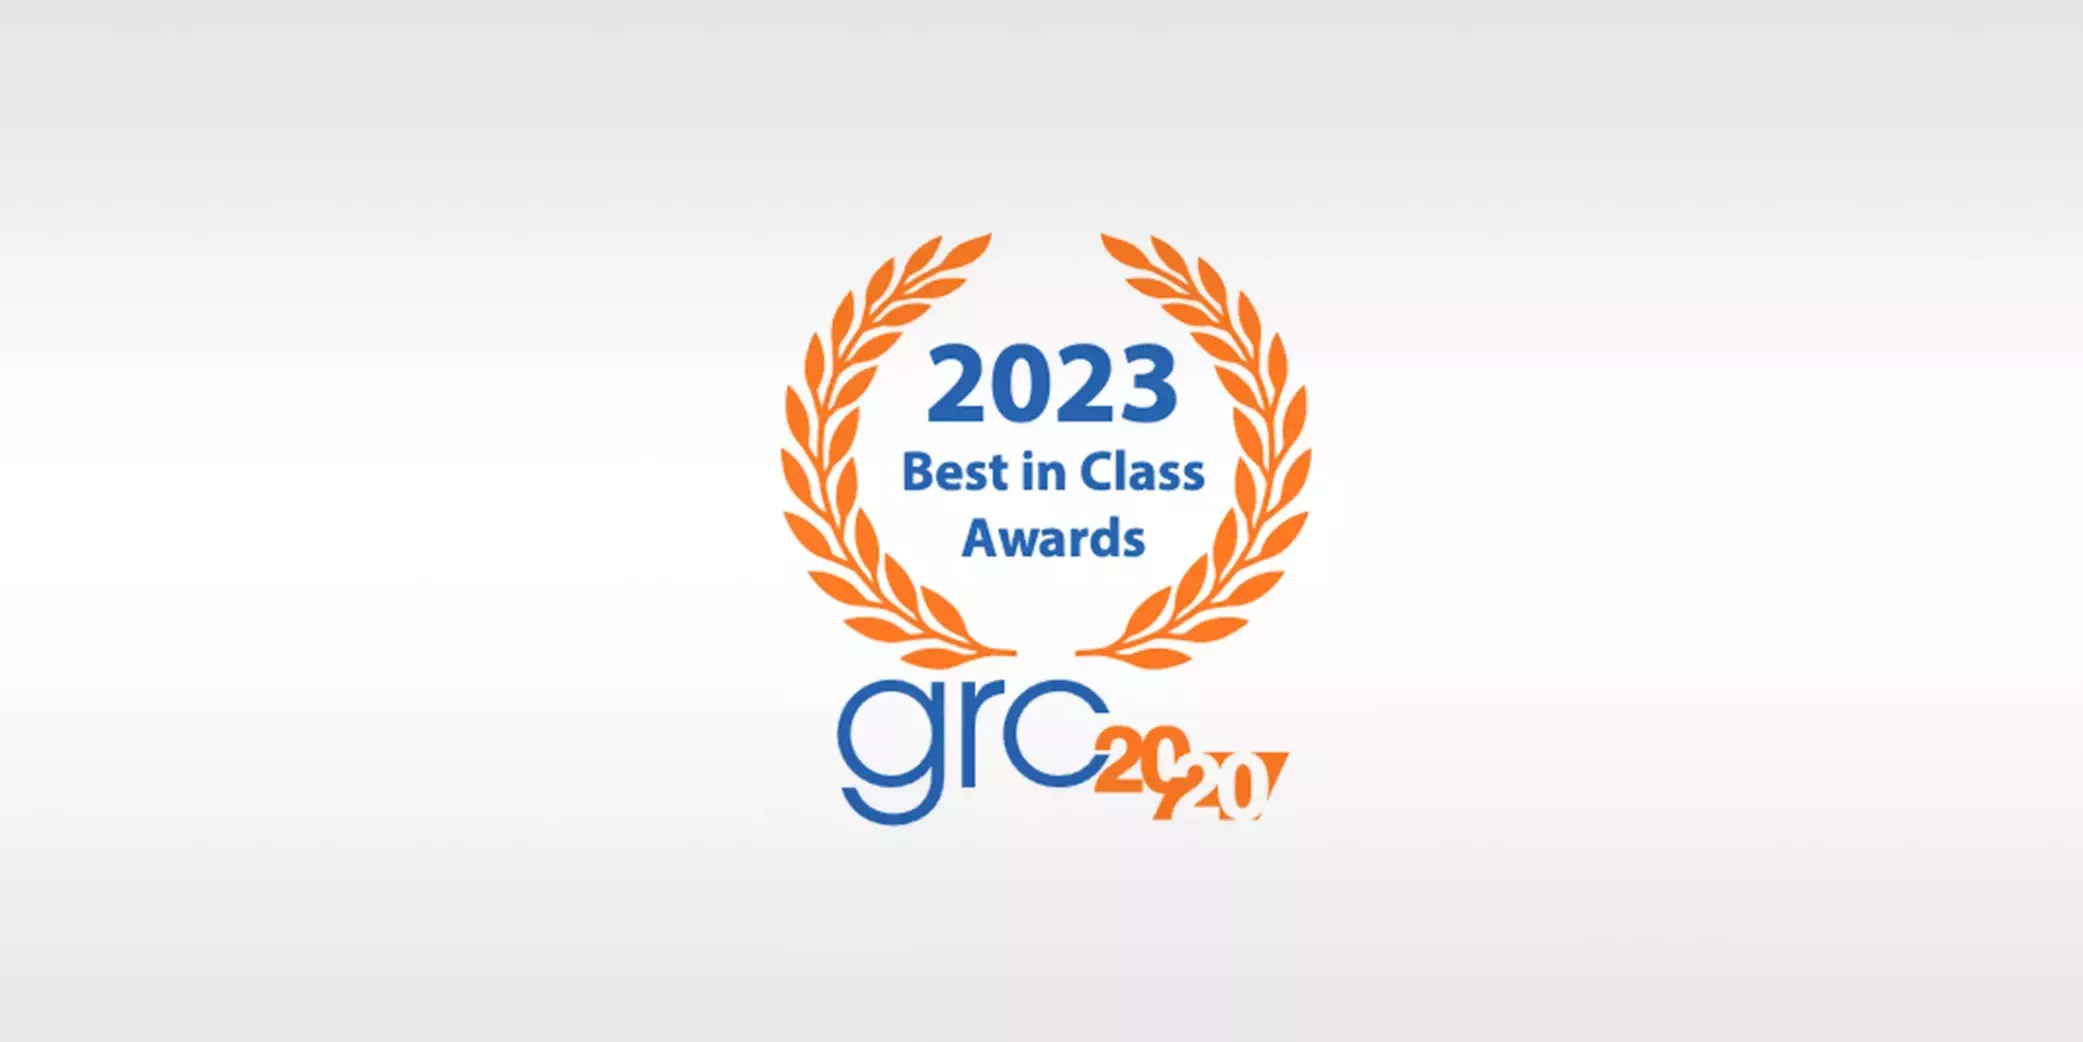 Meet the 2023 Winners of the GRC 20/20 Best in Class Awards